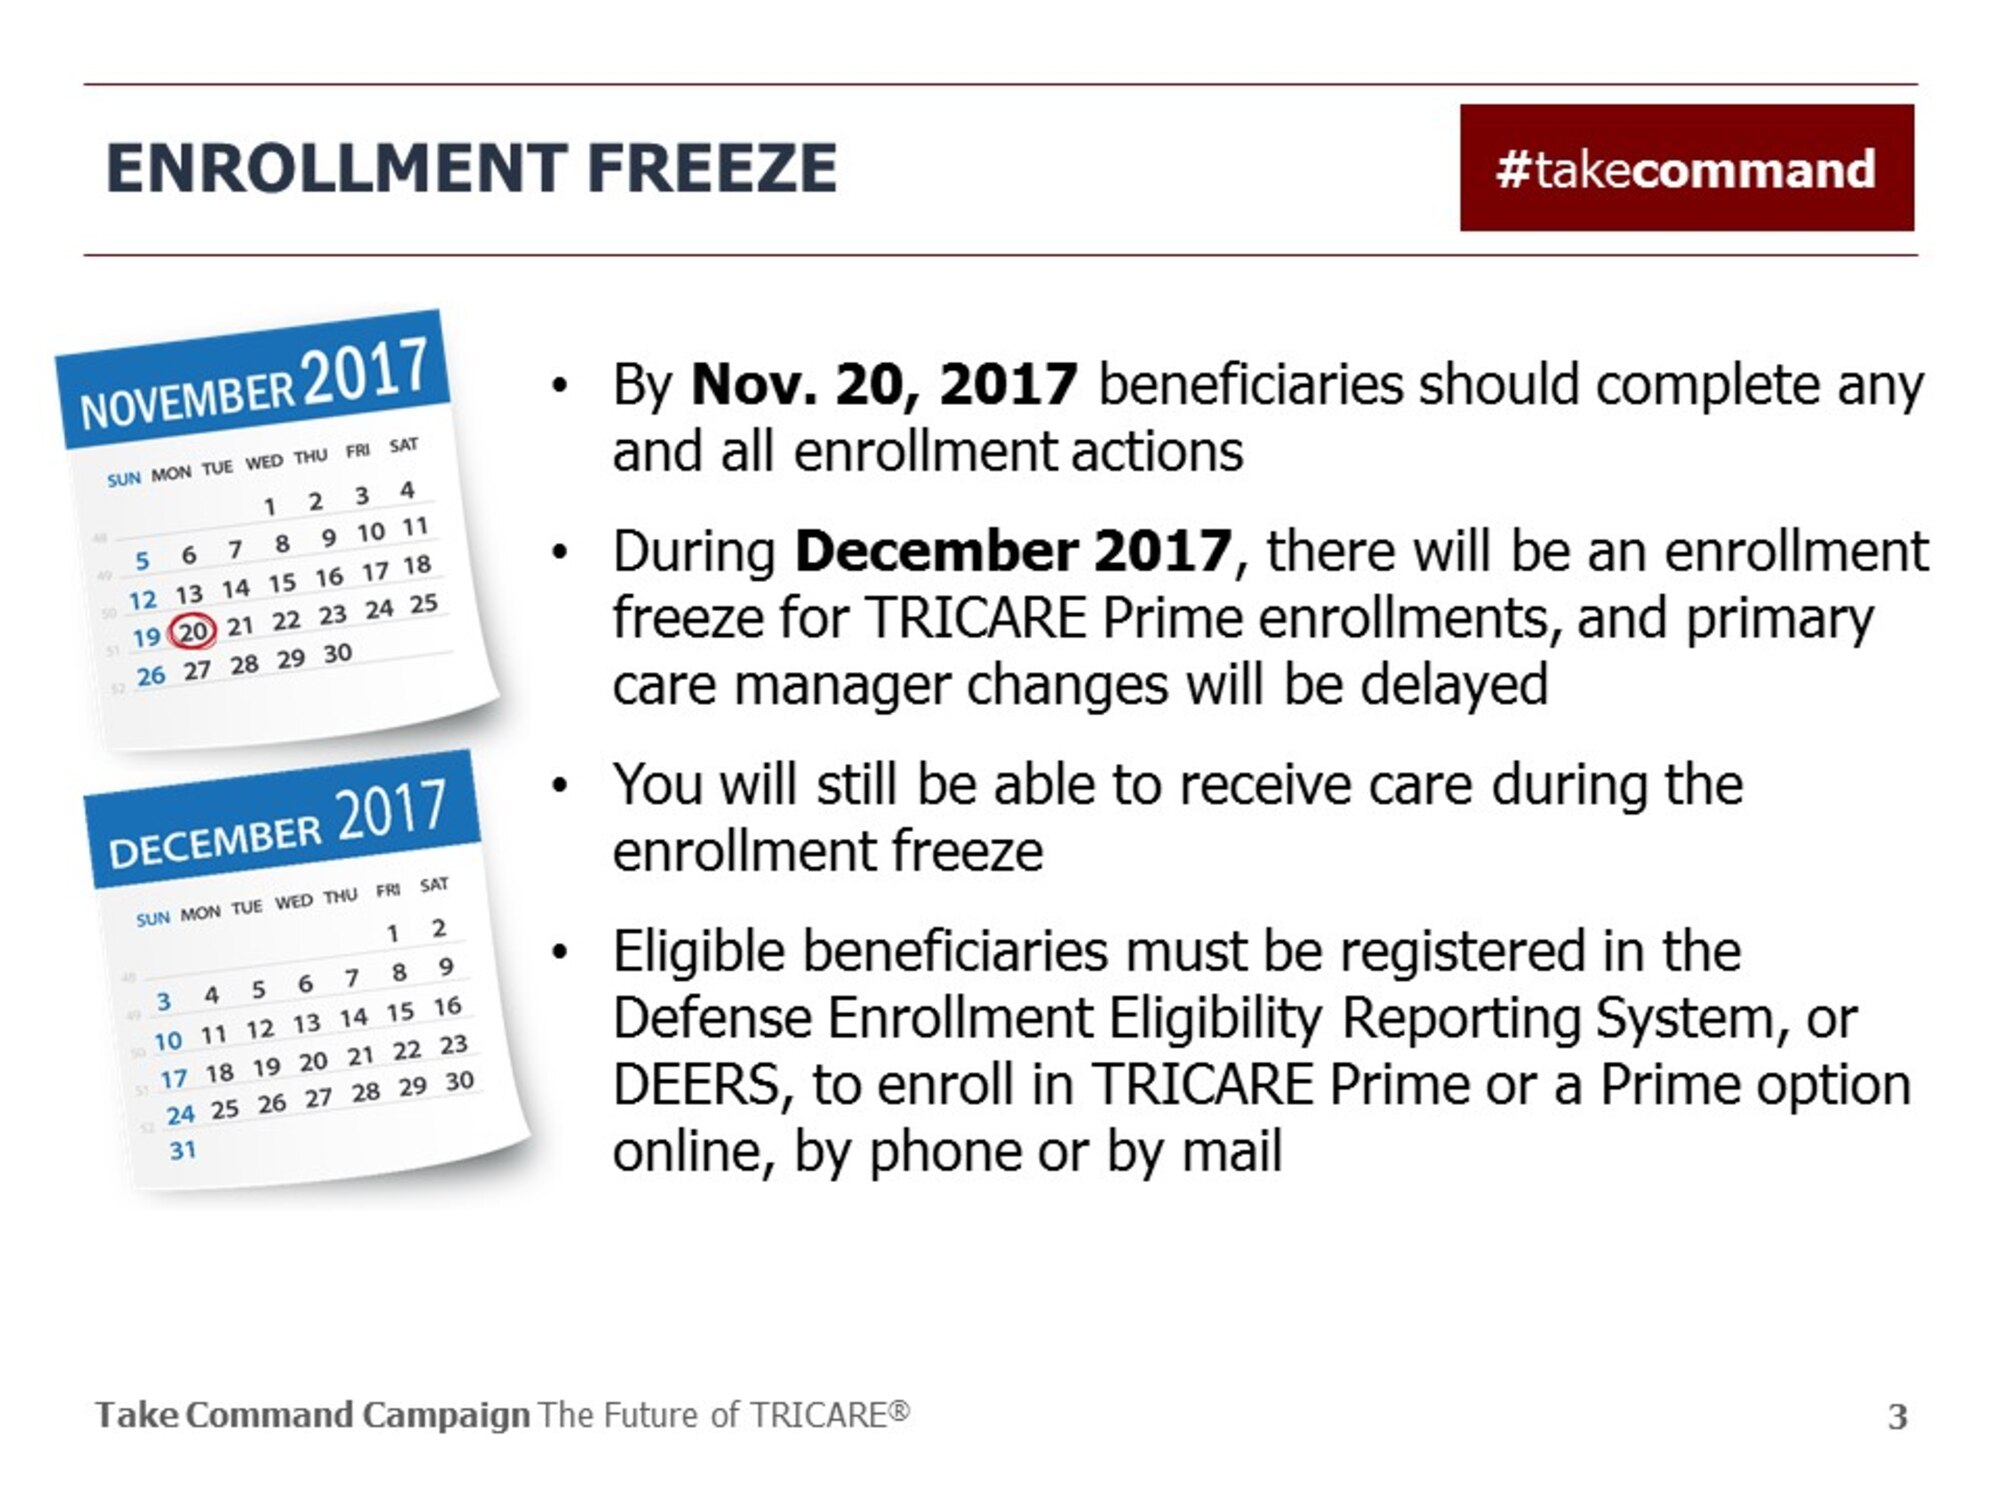 Members will still receive medical care during the freeze. If you have problems accessing care during the freeze, contact your regional contractor.